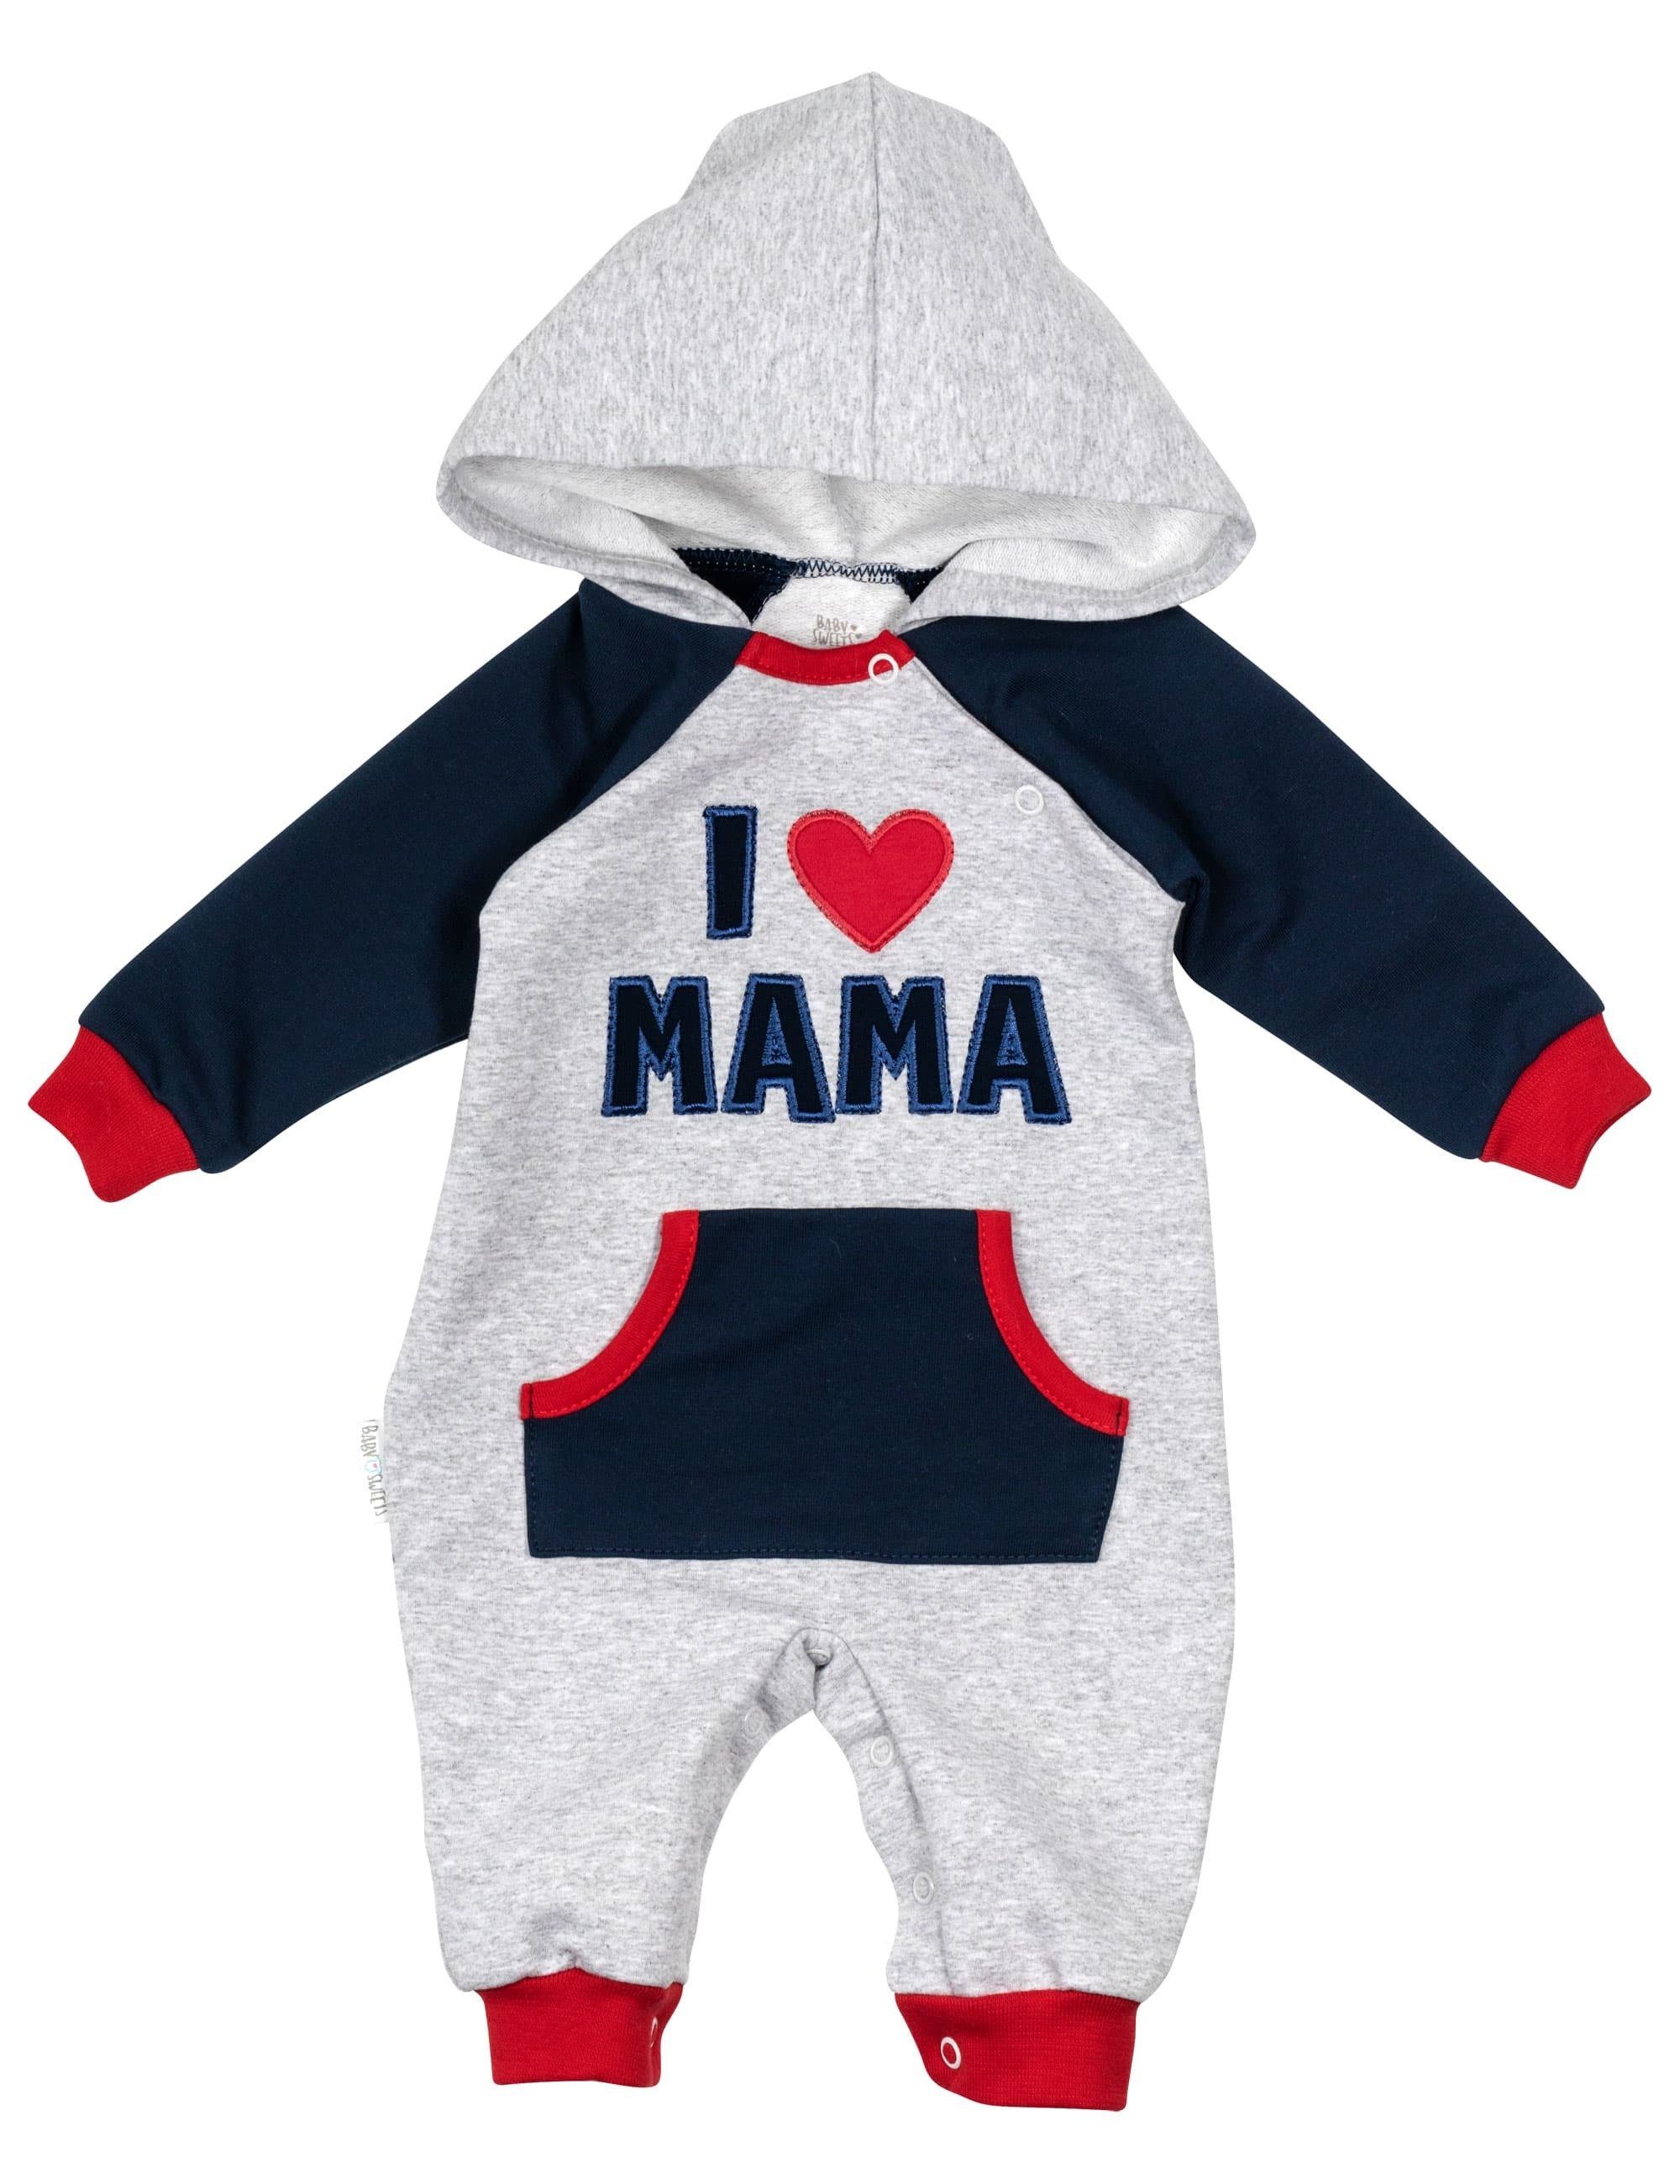 love Overall Overall Baby Strampler, Sweets (1-tlg) I Mama